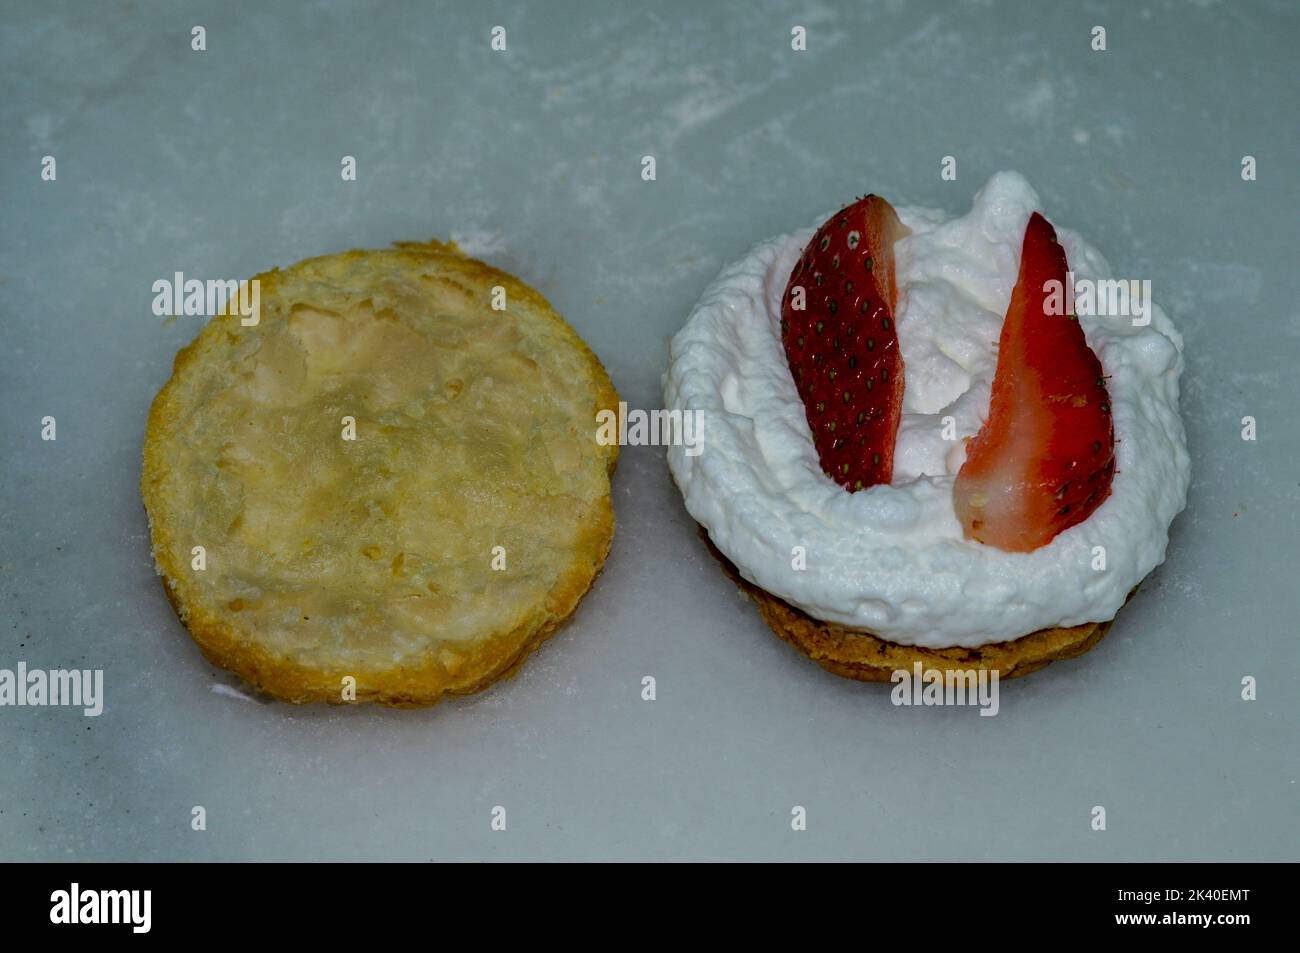 Cream and strawberry cupcakes, made in a pastry kitchen Stock Photo